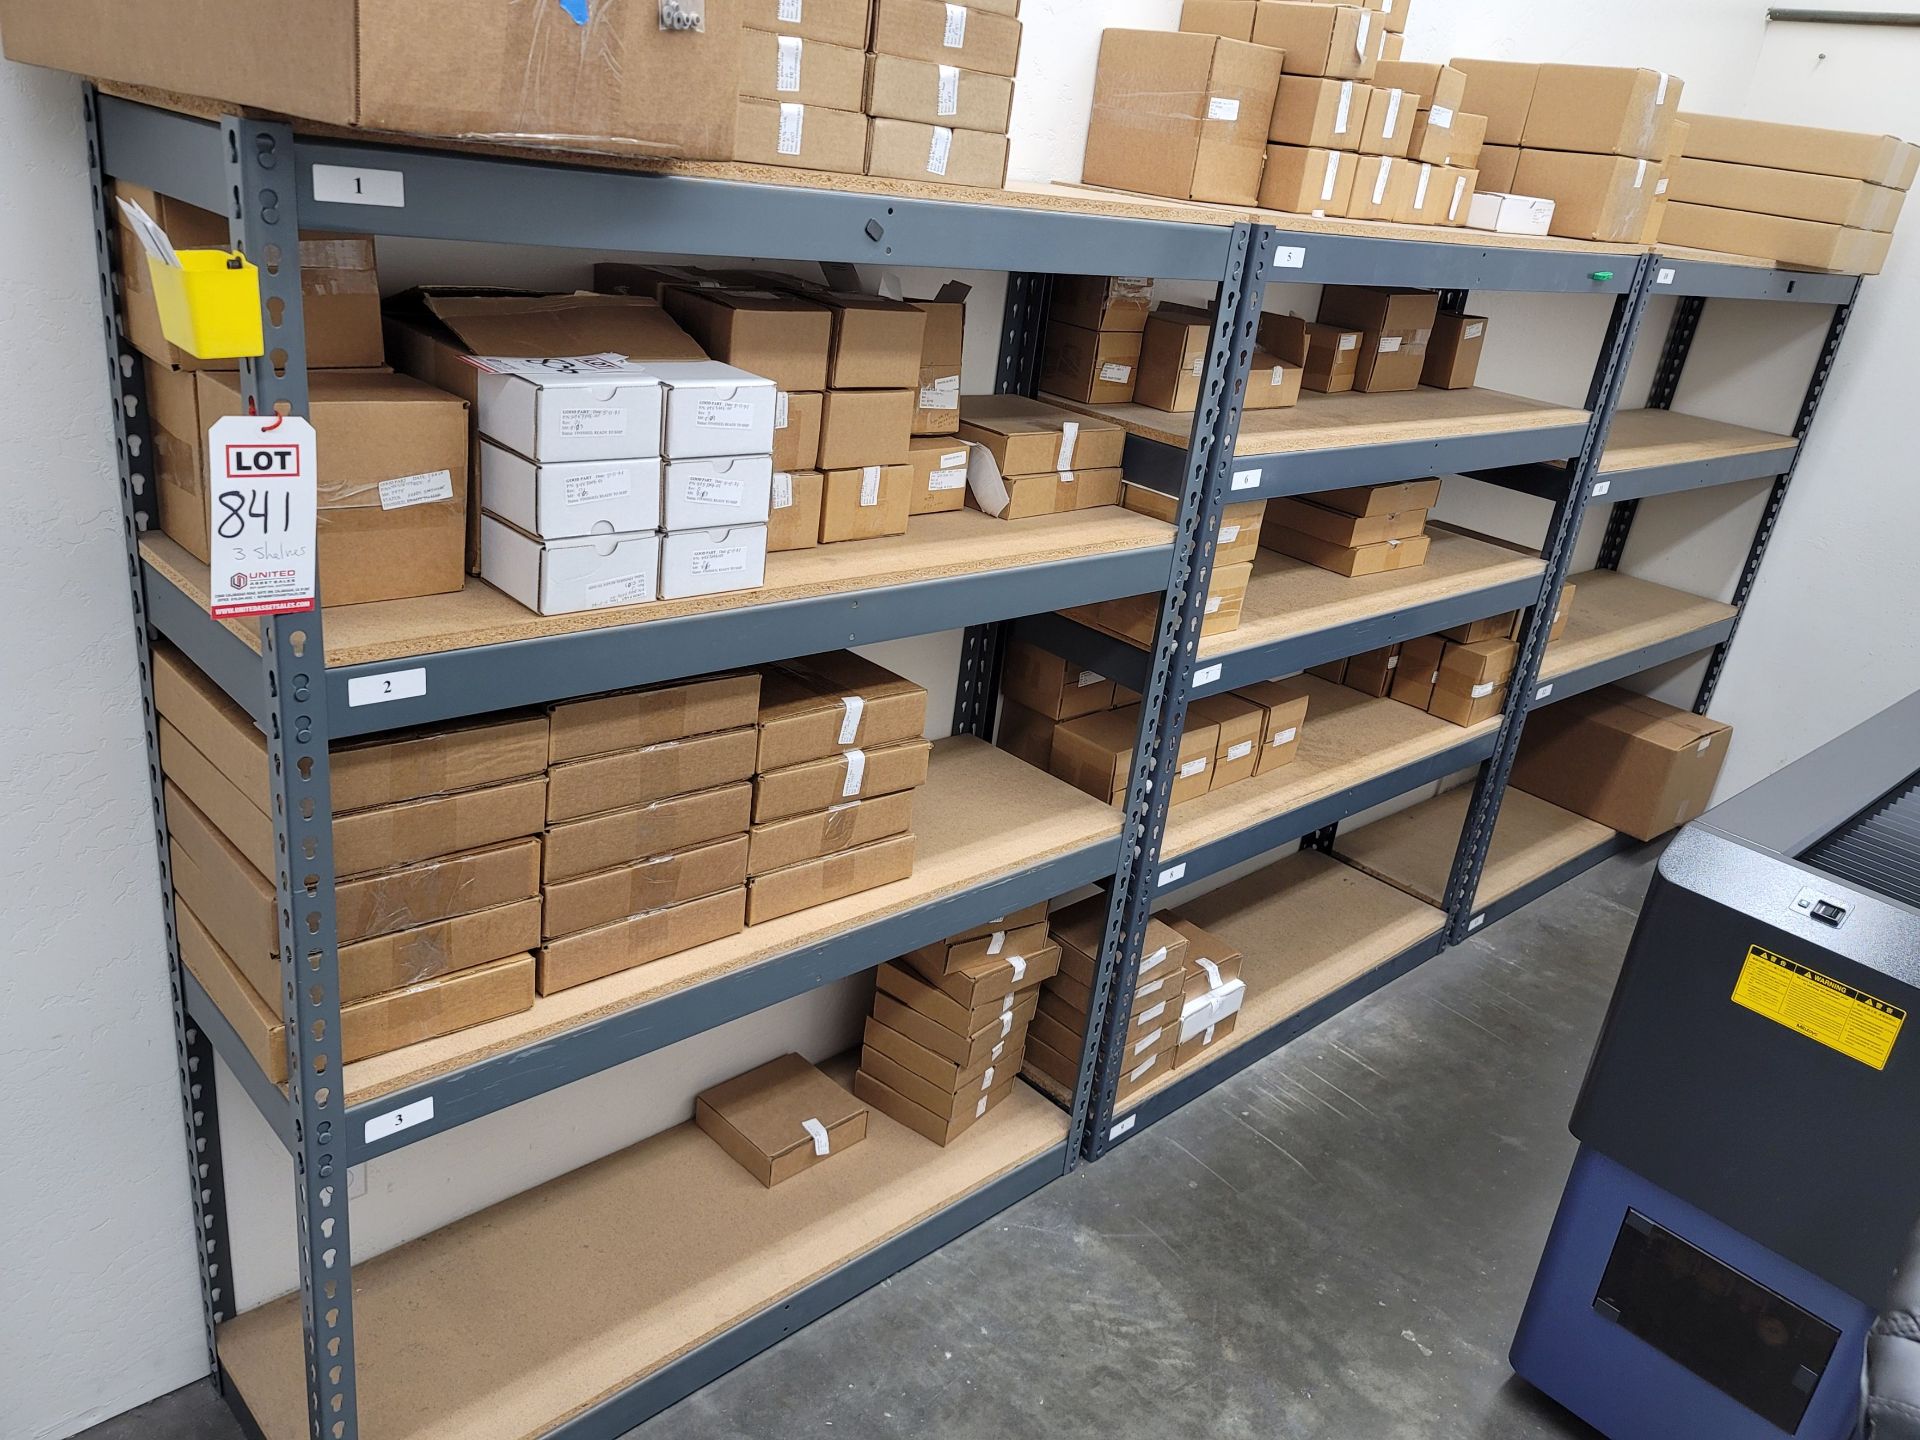 LOT - (3) SHELF UNITS, STEEL W/ PARTICLE BOARD SHELVES, 4' X 15' X 5' HEIGHT, CONTENTS NOT INCLUDED